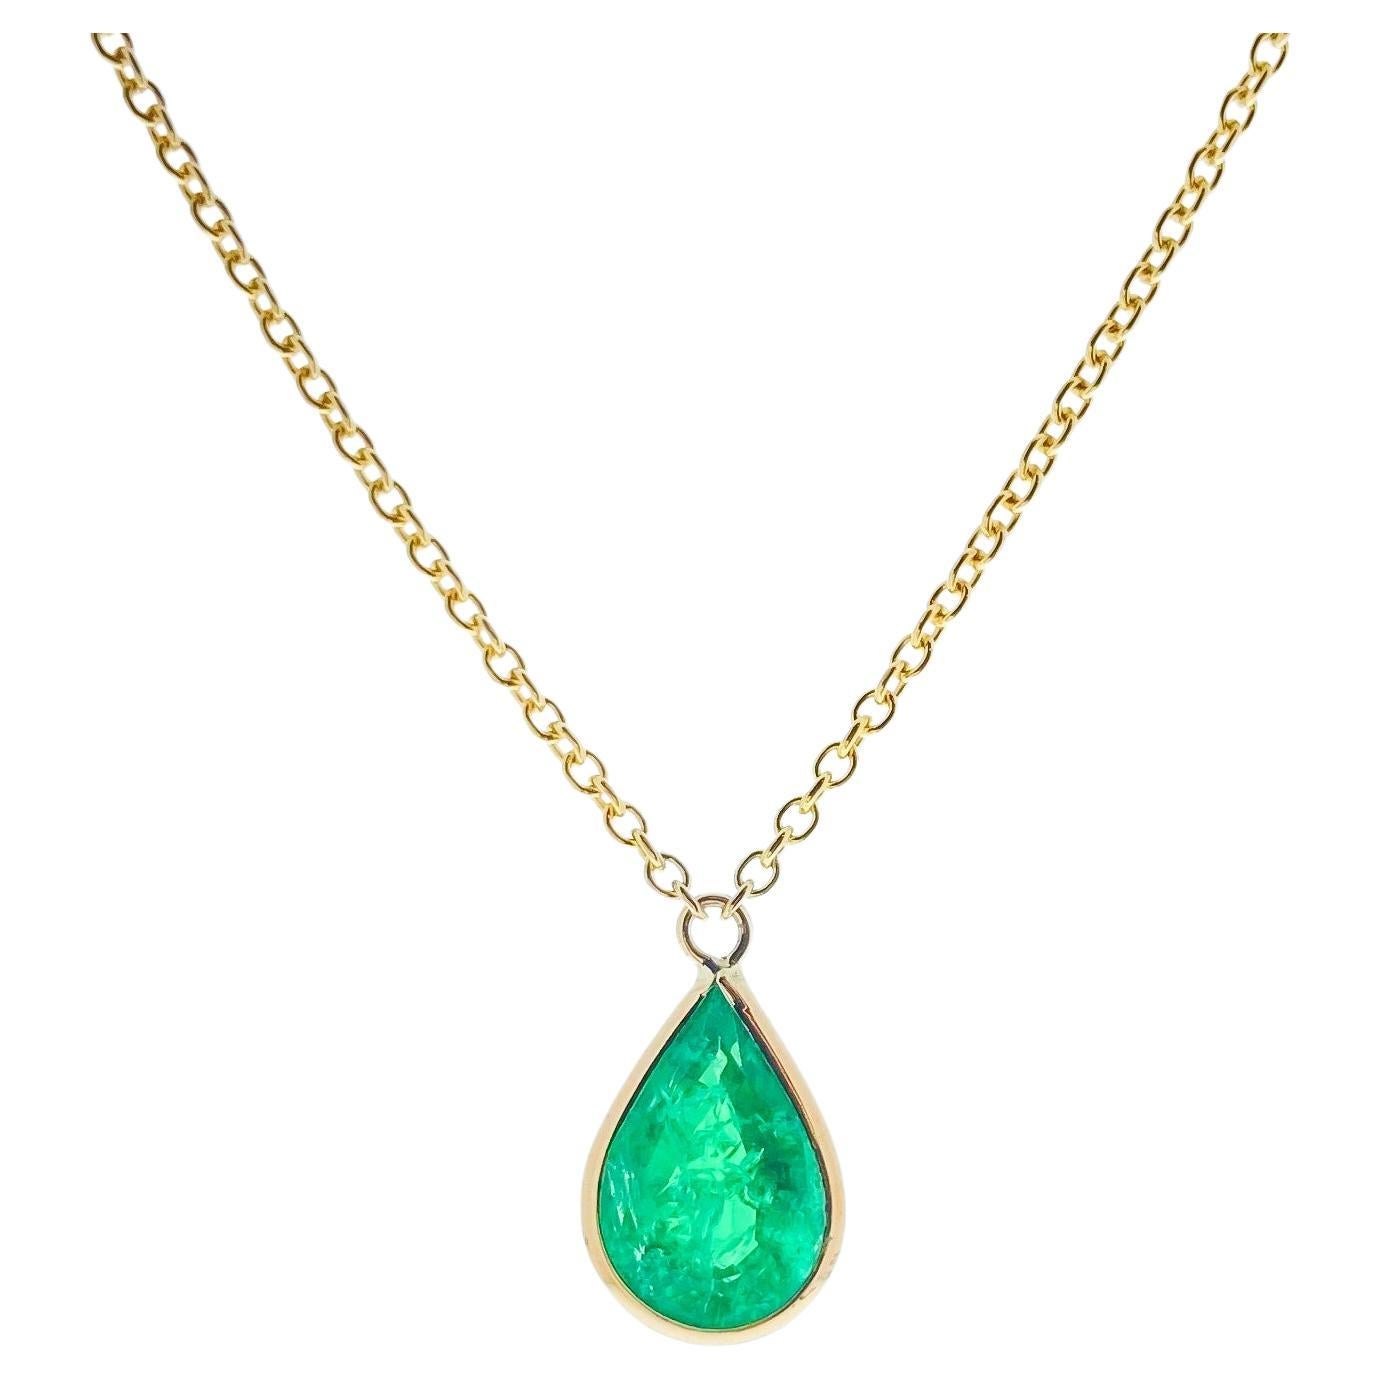 1.34 Carat Green Emerald Pear Shape Fashion Necklaces In 14K Yellow Gold For Sale